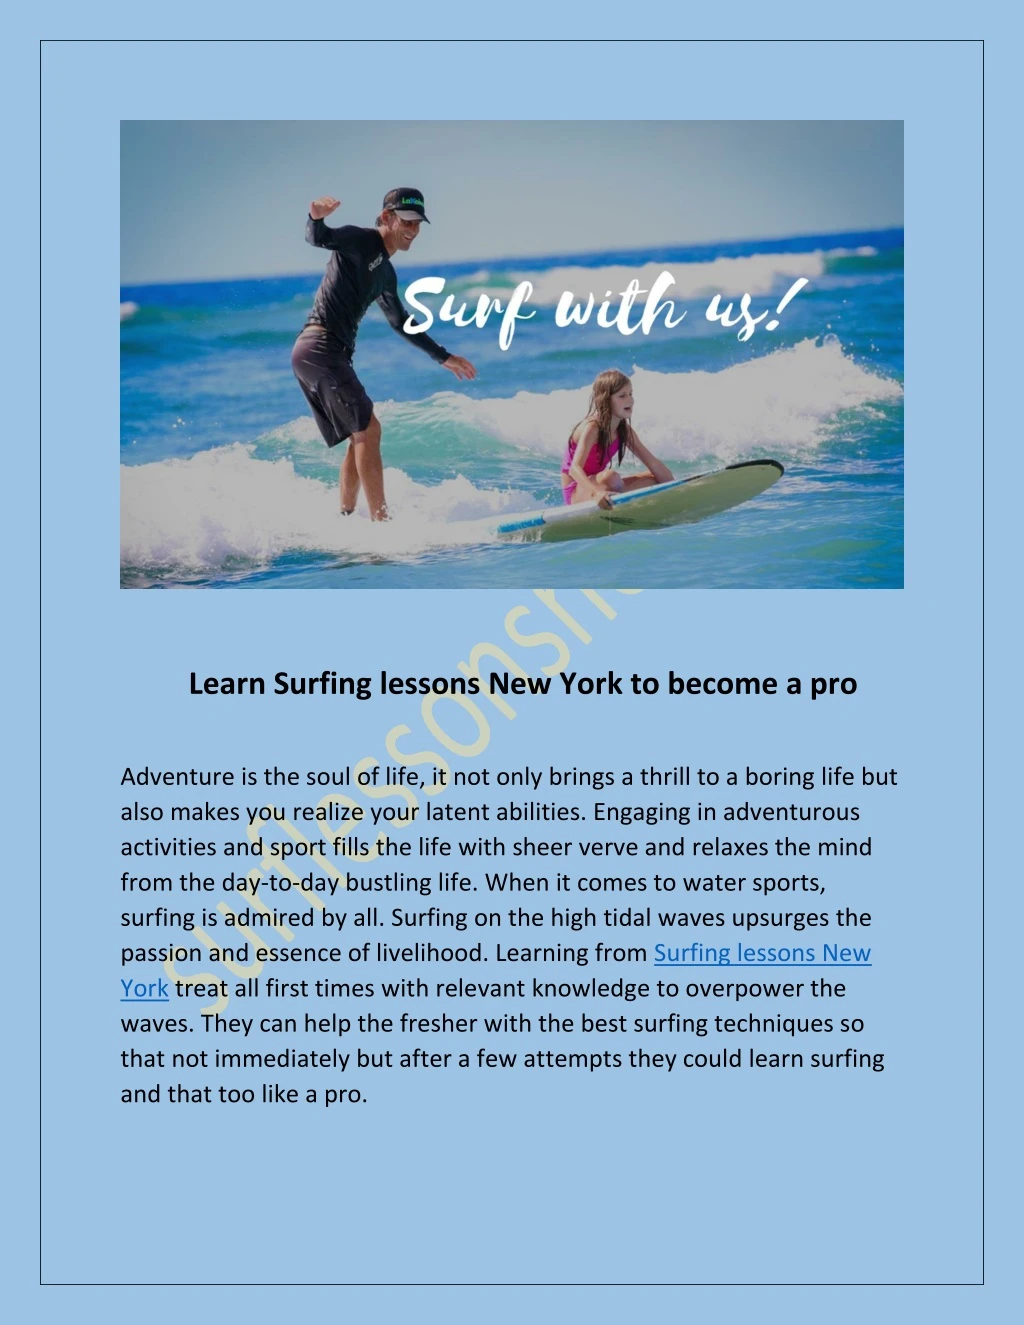 learn surfing lessons new york to become a pro